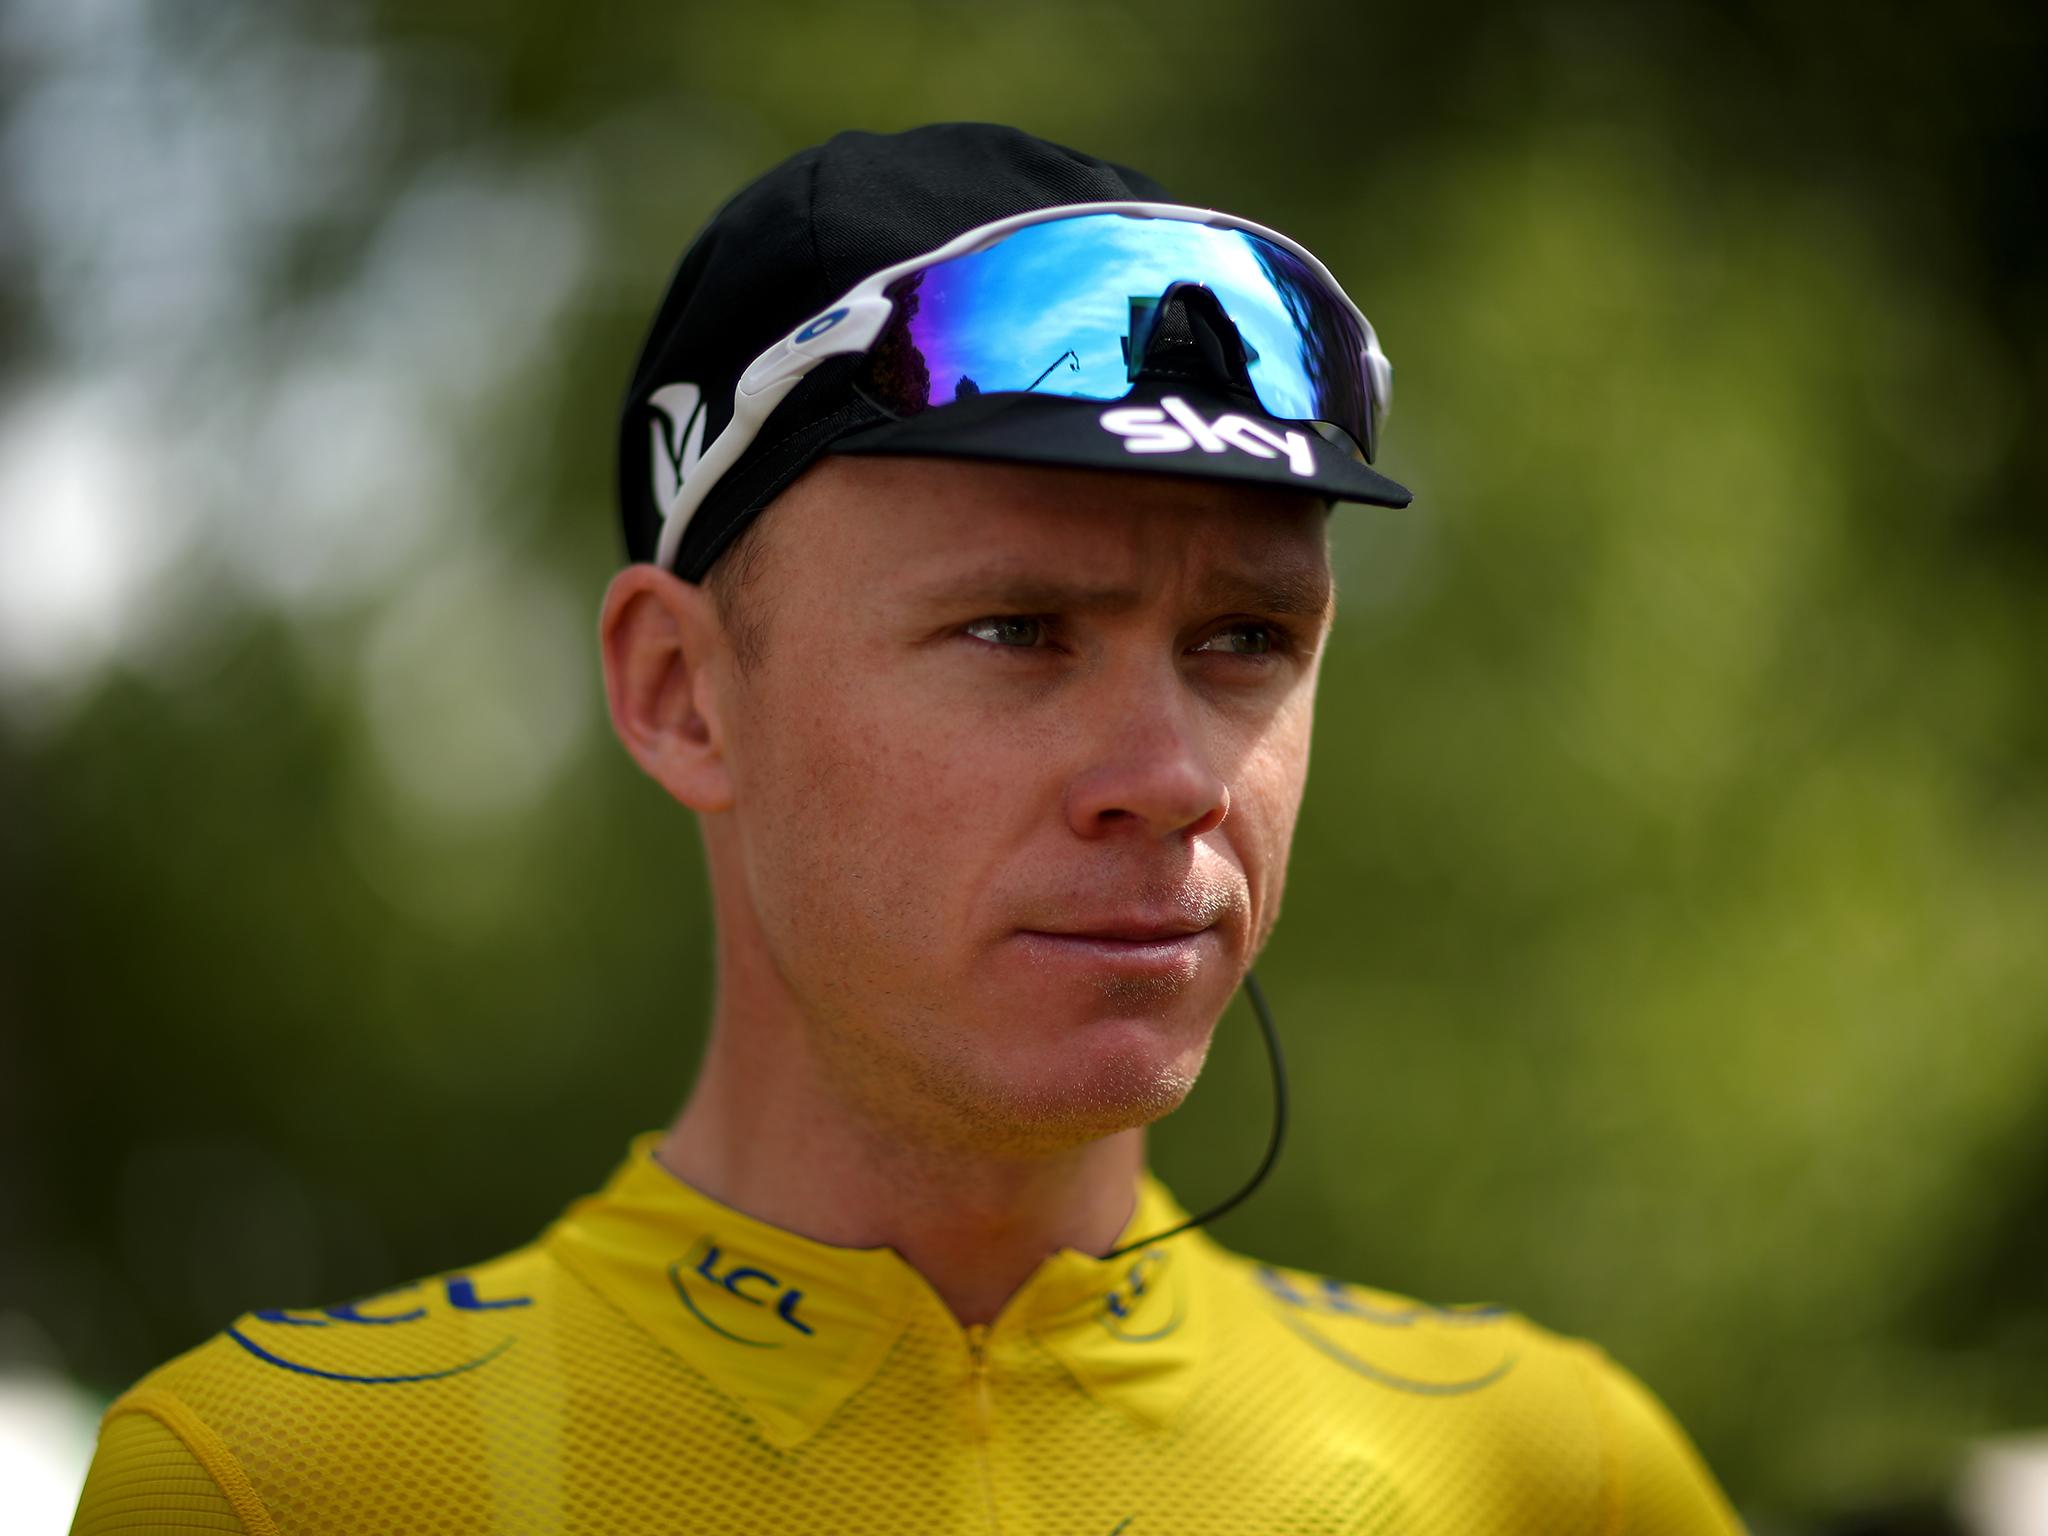 Froome is seeking to prove his innocence over an adverse finding for elevated levels of salbutamol at last year's La Vuelta